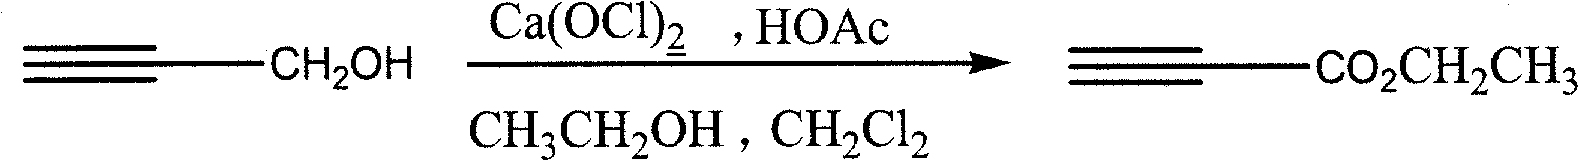 Process for synthesizing ethyl propiolate